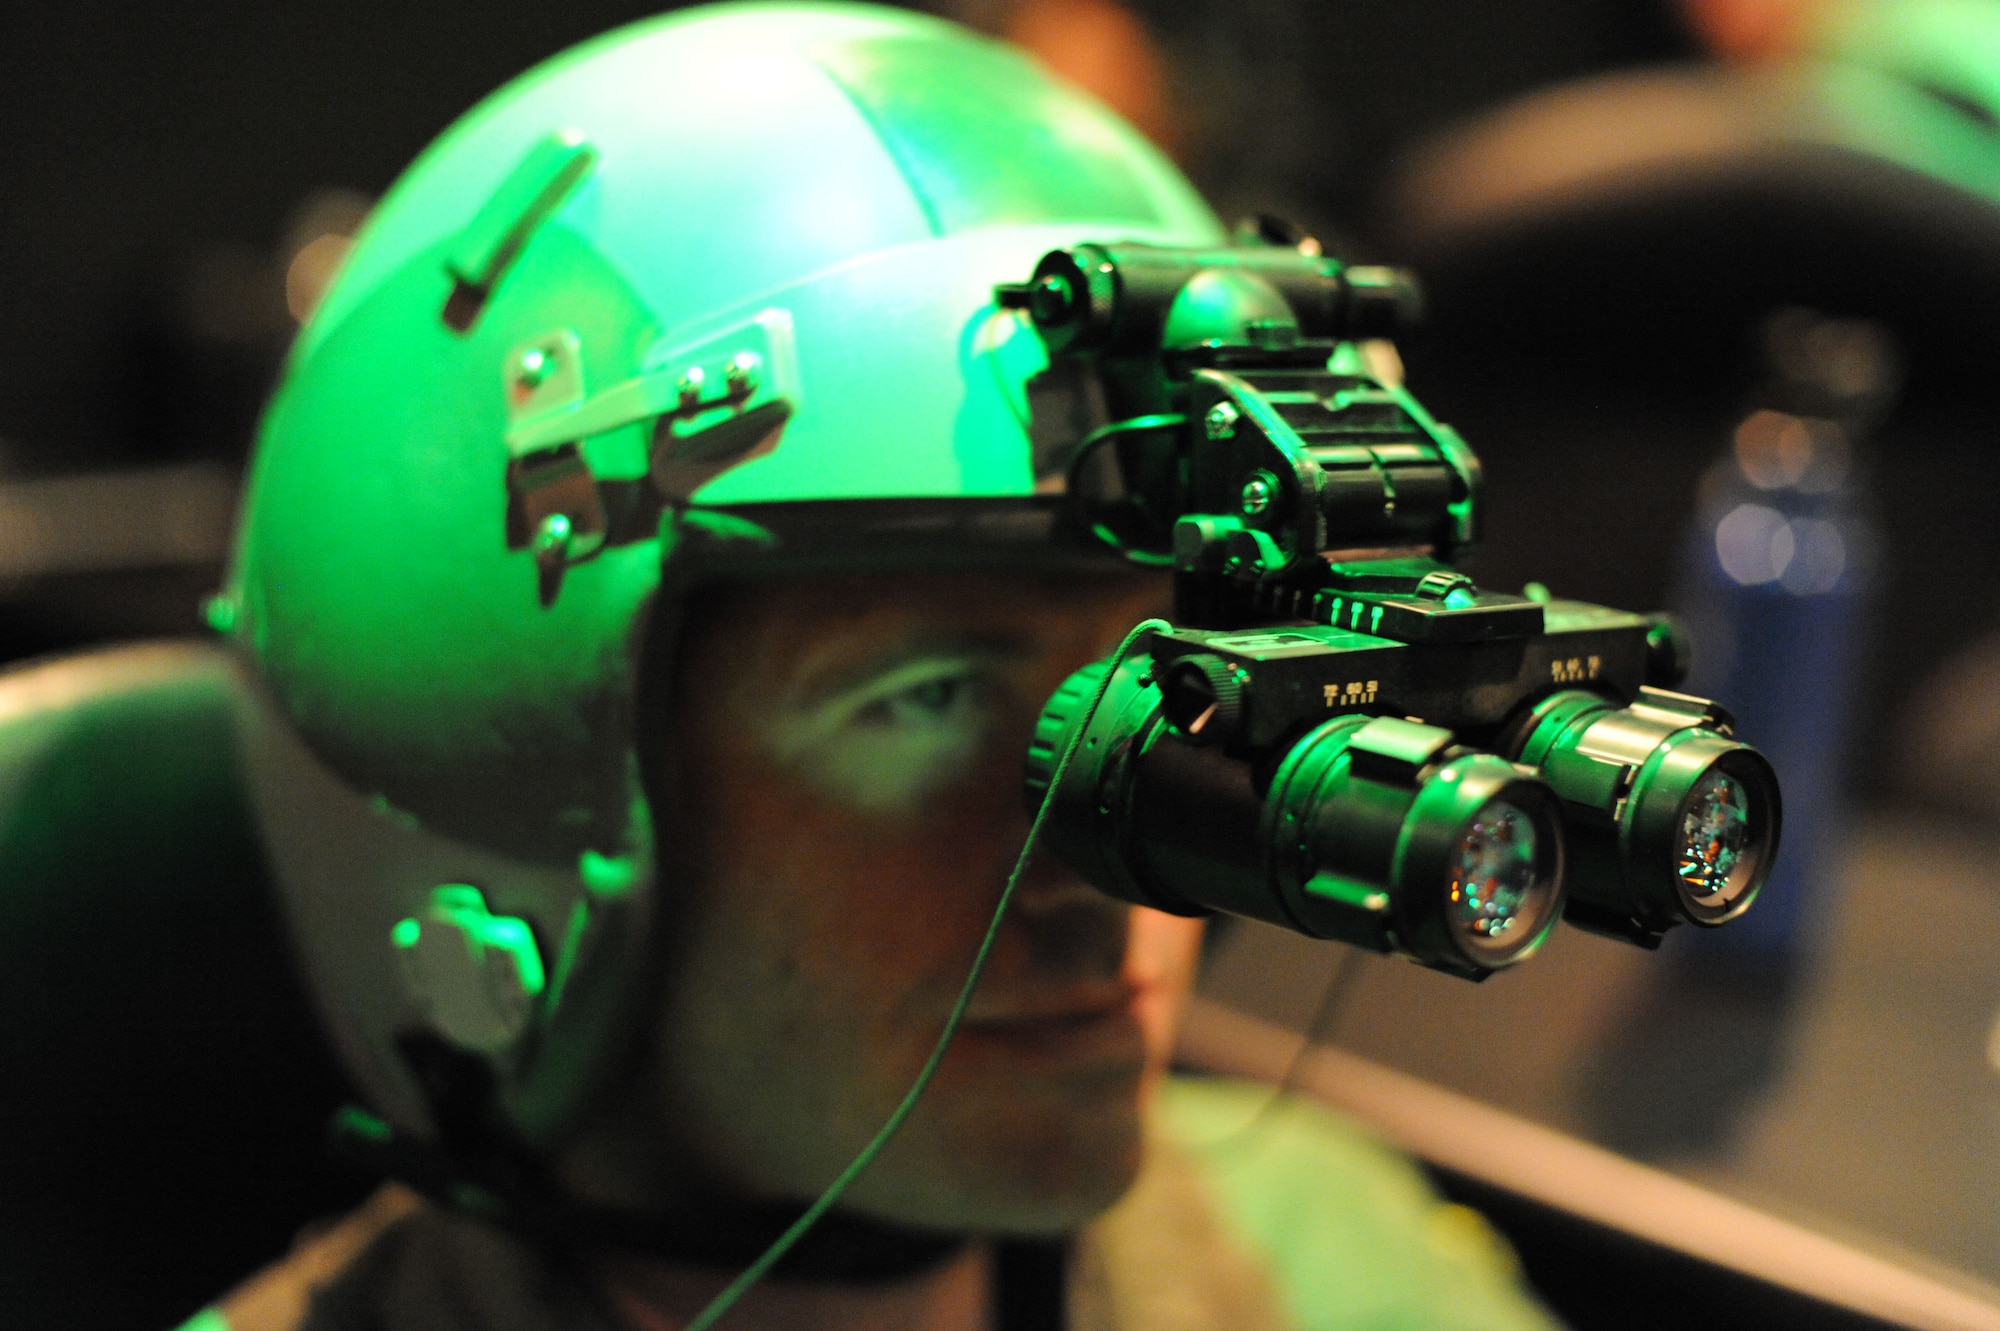 2nd Lt. Michael Vastola, 359th Aerospace Medicine Squadron OIC of Logistics Element,  aligns his night vision goggles during a NVG Academic Instructors Course held at the Aerospace Physiology building on Joint Base San Antonio-Randolph Jan. 25. (U.S. Air Force photo/Rich McFadden) (released)